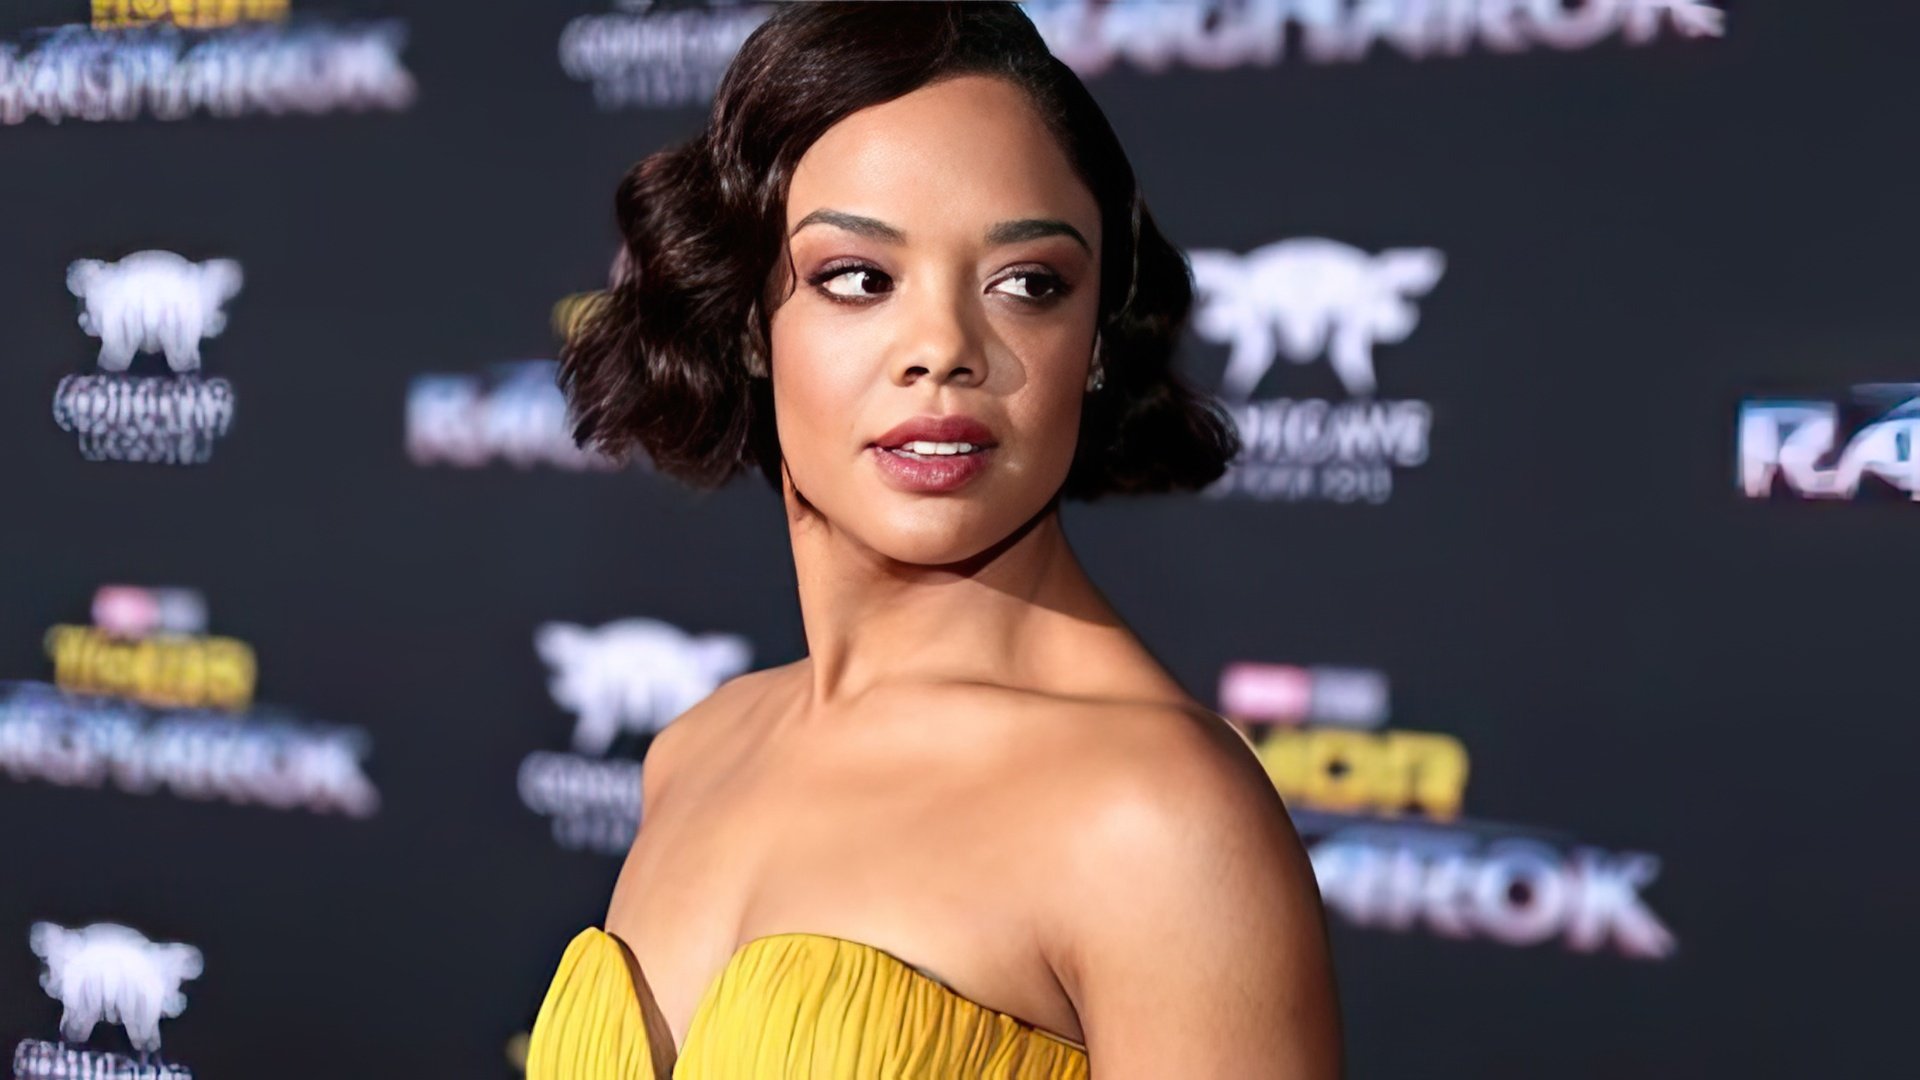 The height of Tessa Thompson is 162 cm